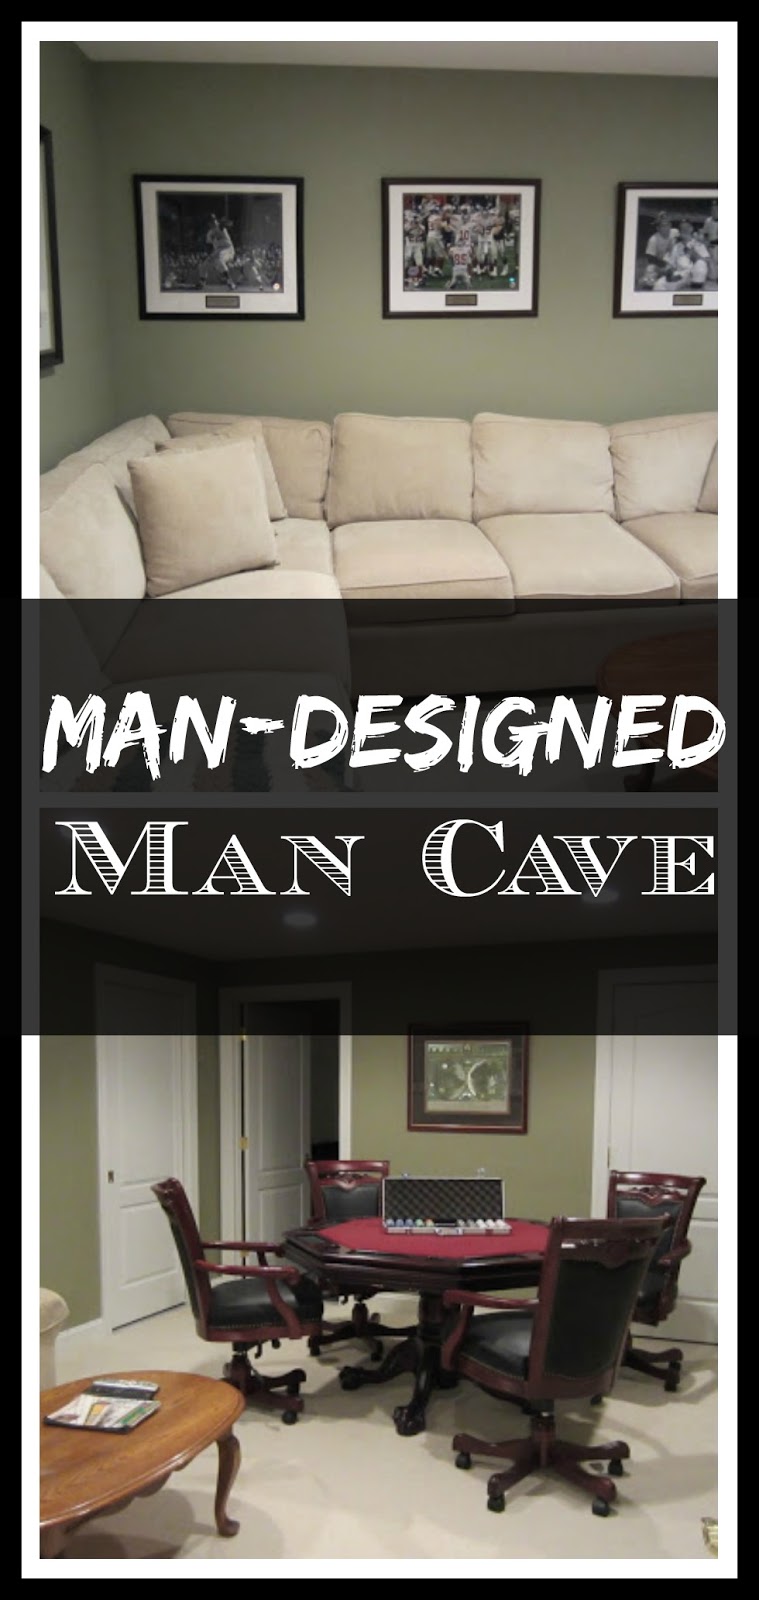 Man Designed Man Cave in the basement - the one room I let my husband design!